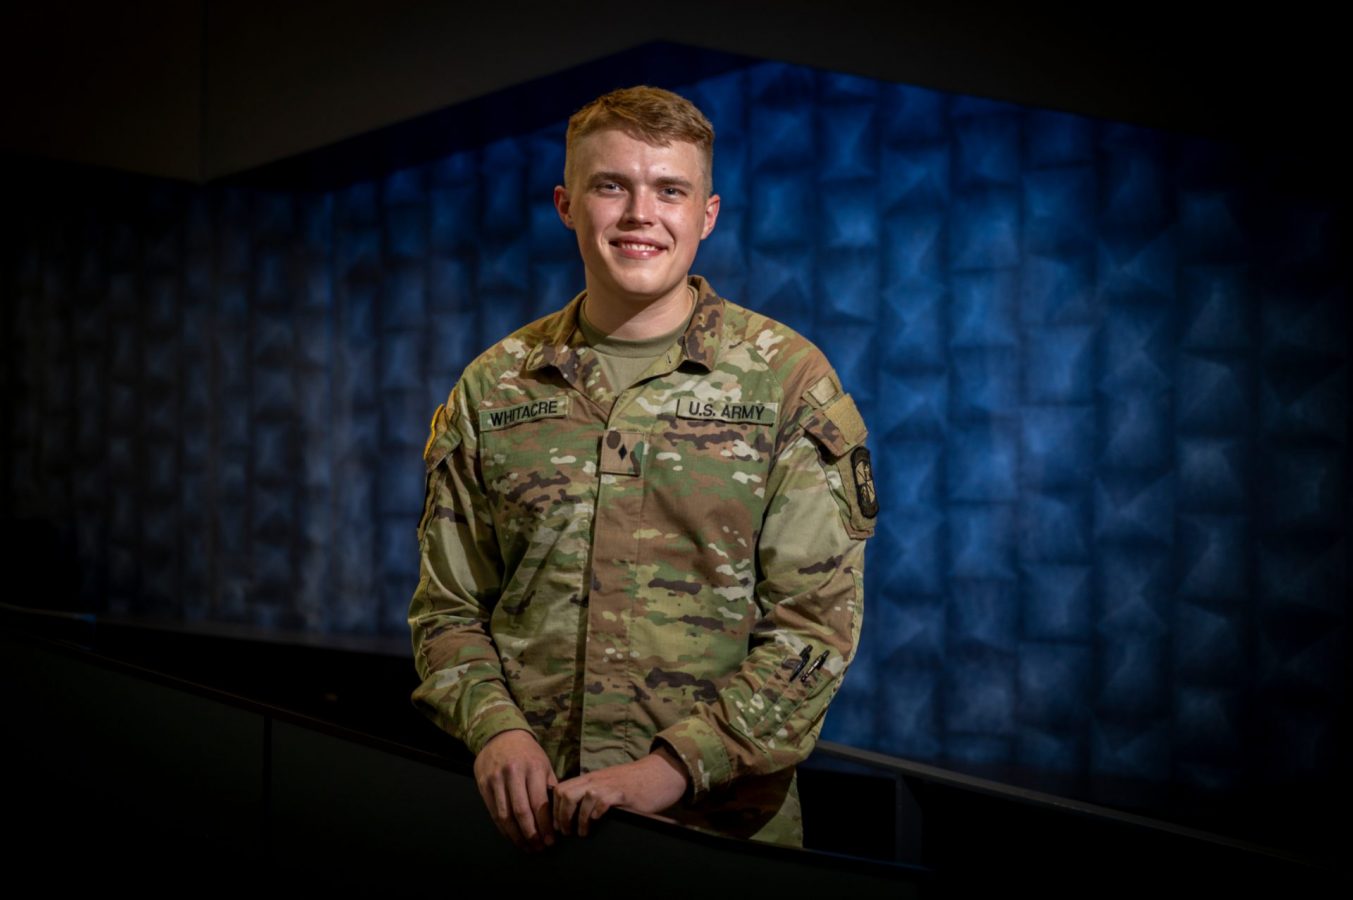 School of Computer and Cyber Sciences student earns top honors at Army ...